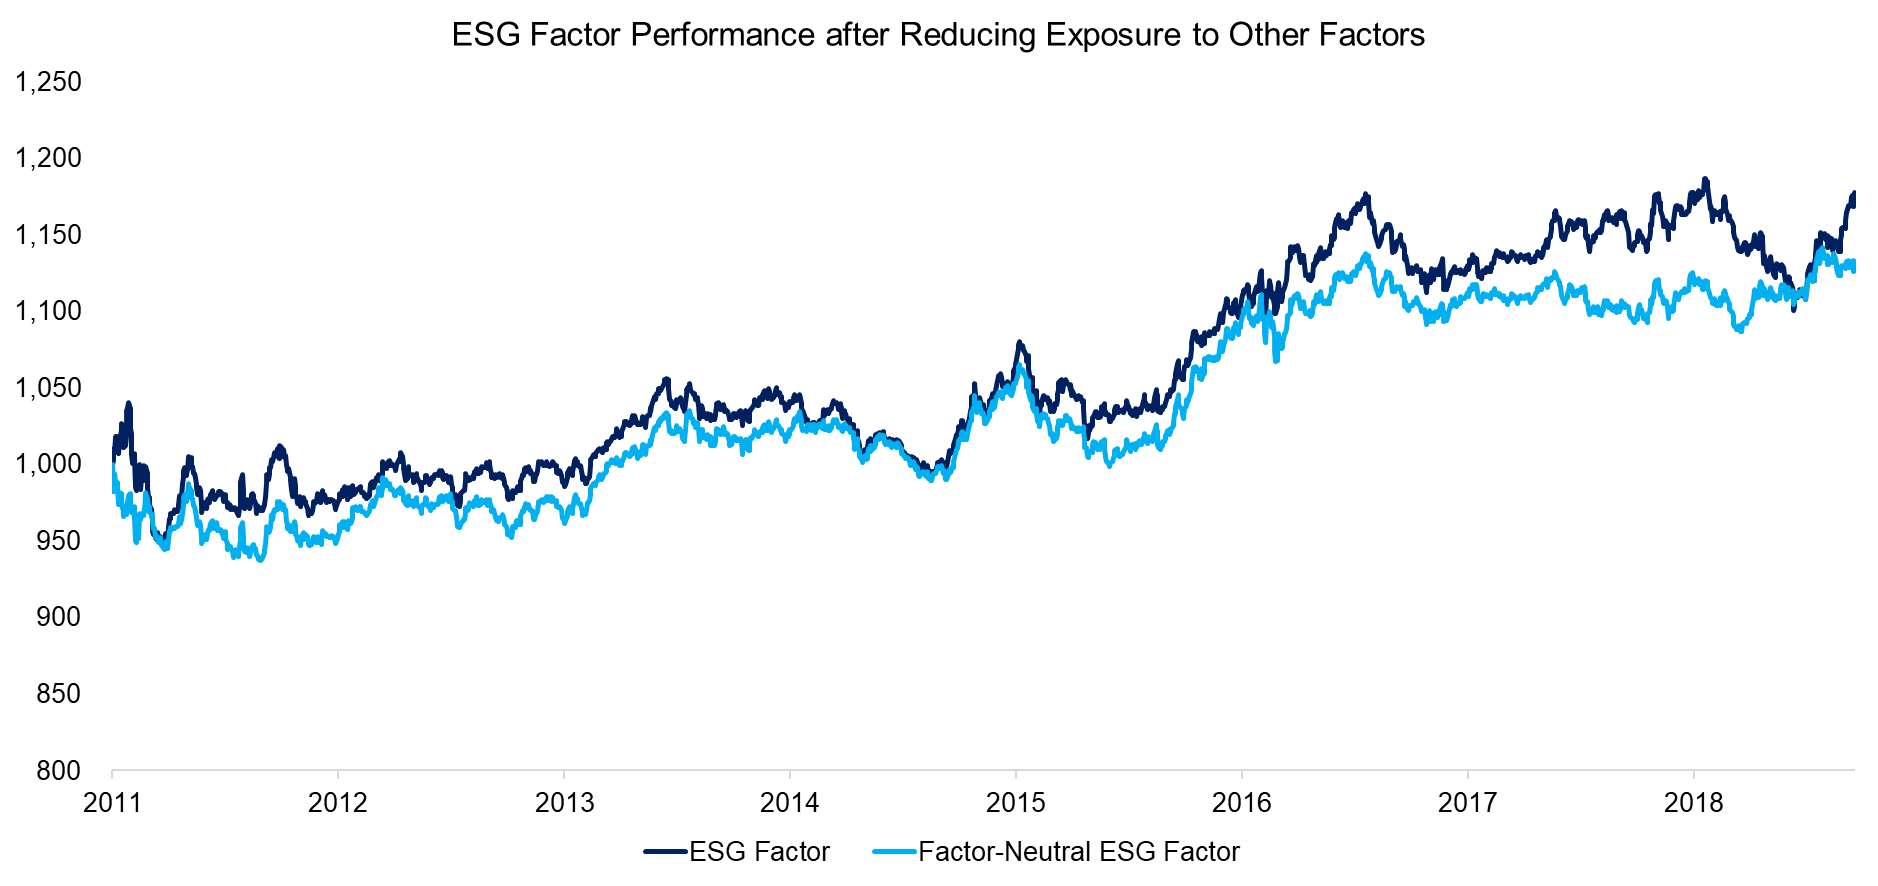 ESG Factor Performance after Reducing Exposure to Other Factors